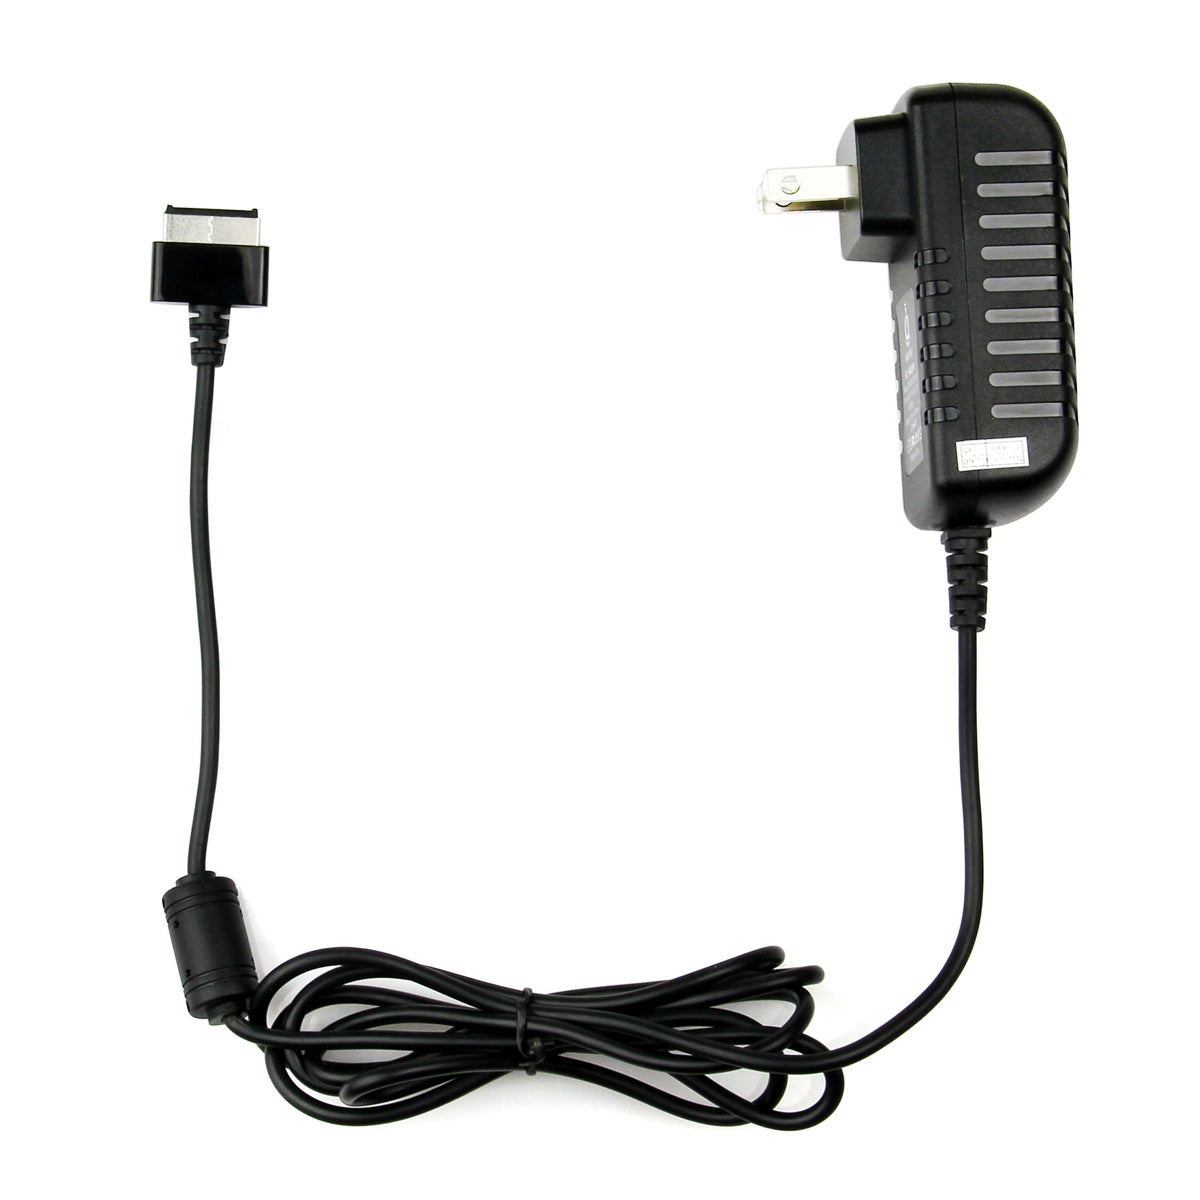 AC Adapter Charger for ASUS TF700T C1 Eee Pad.